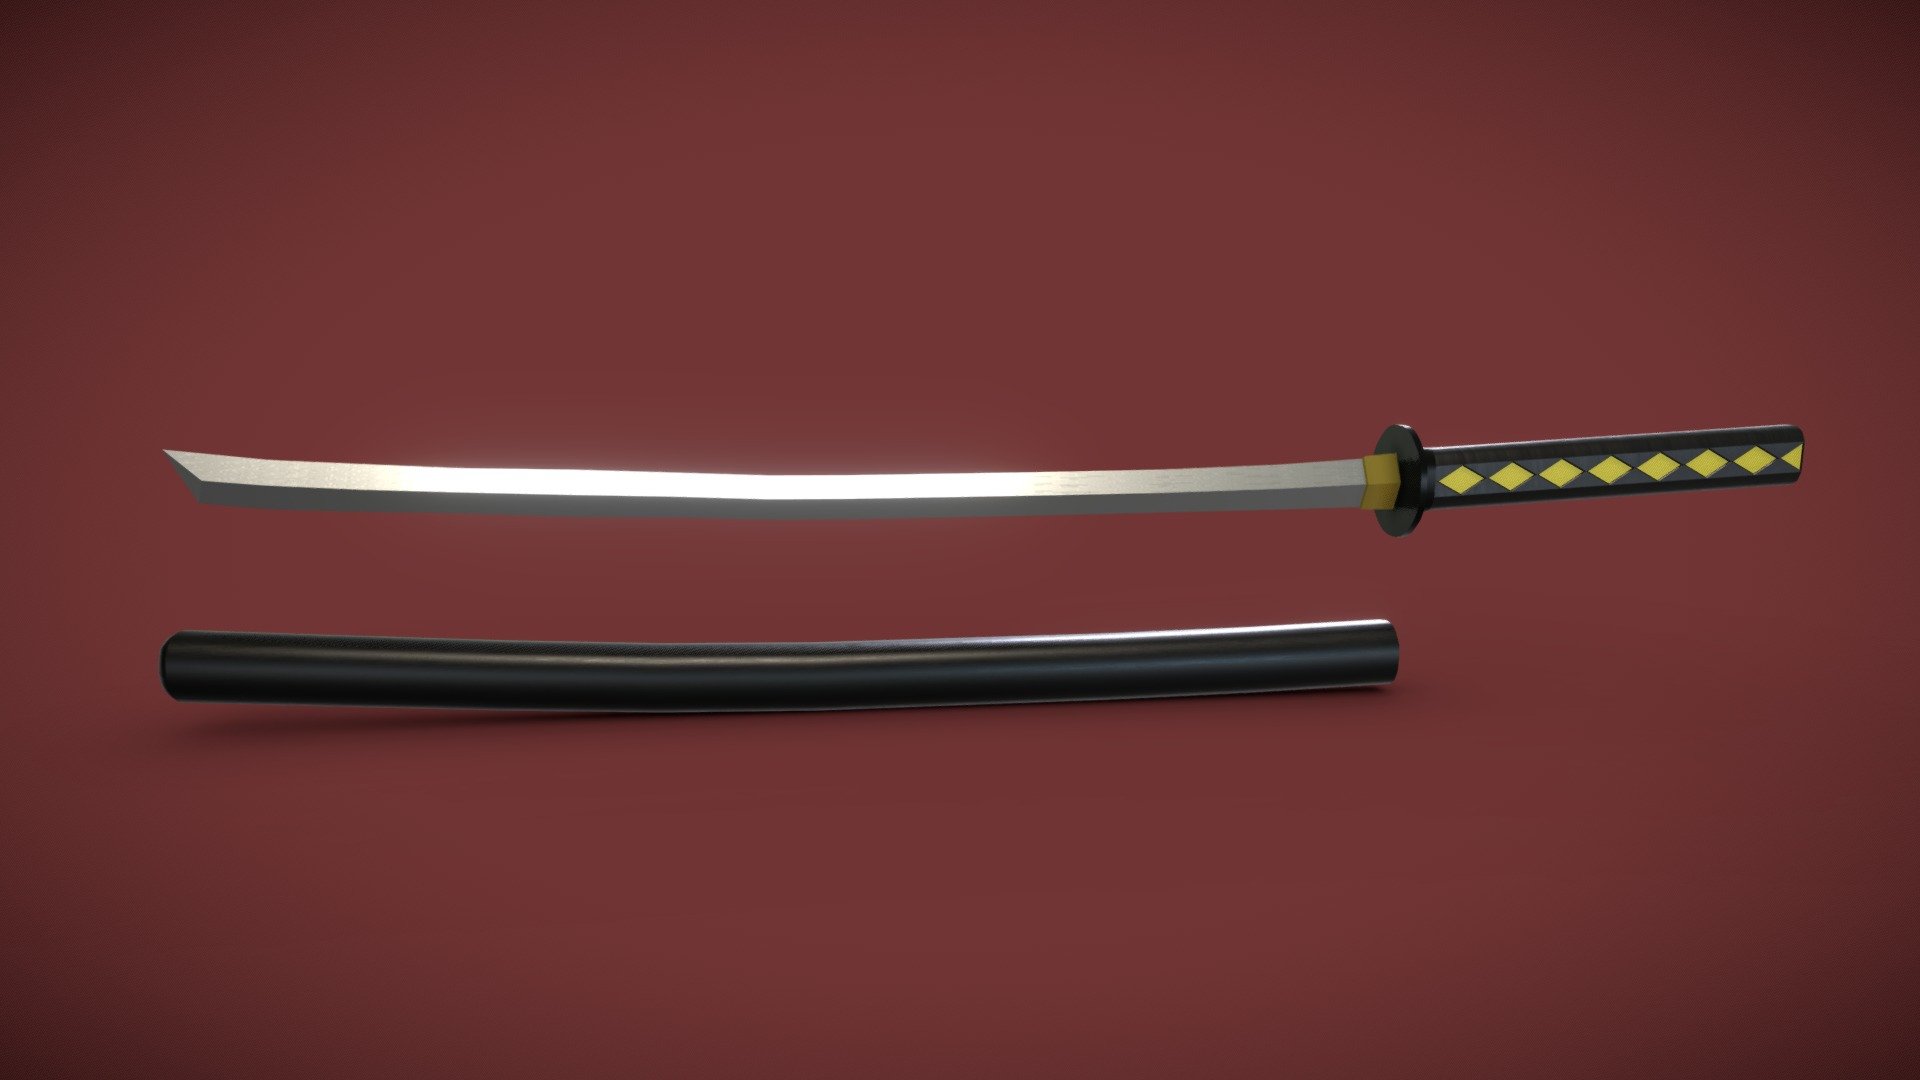 A game-ready model of the signature sword from the TV show Samurai Jack.

Modeled in Maya and textured in Substance Painter 3d model